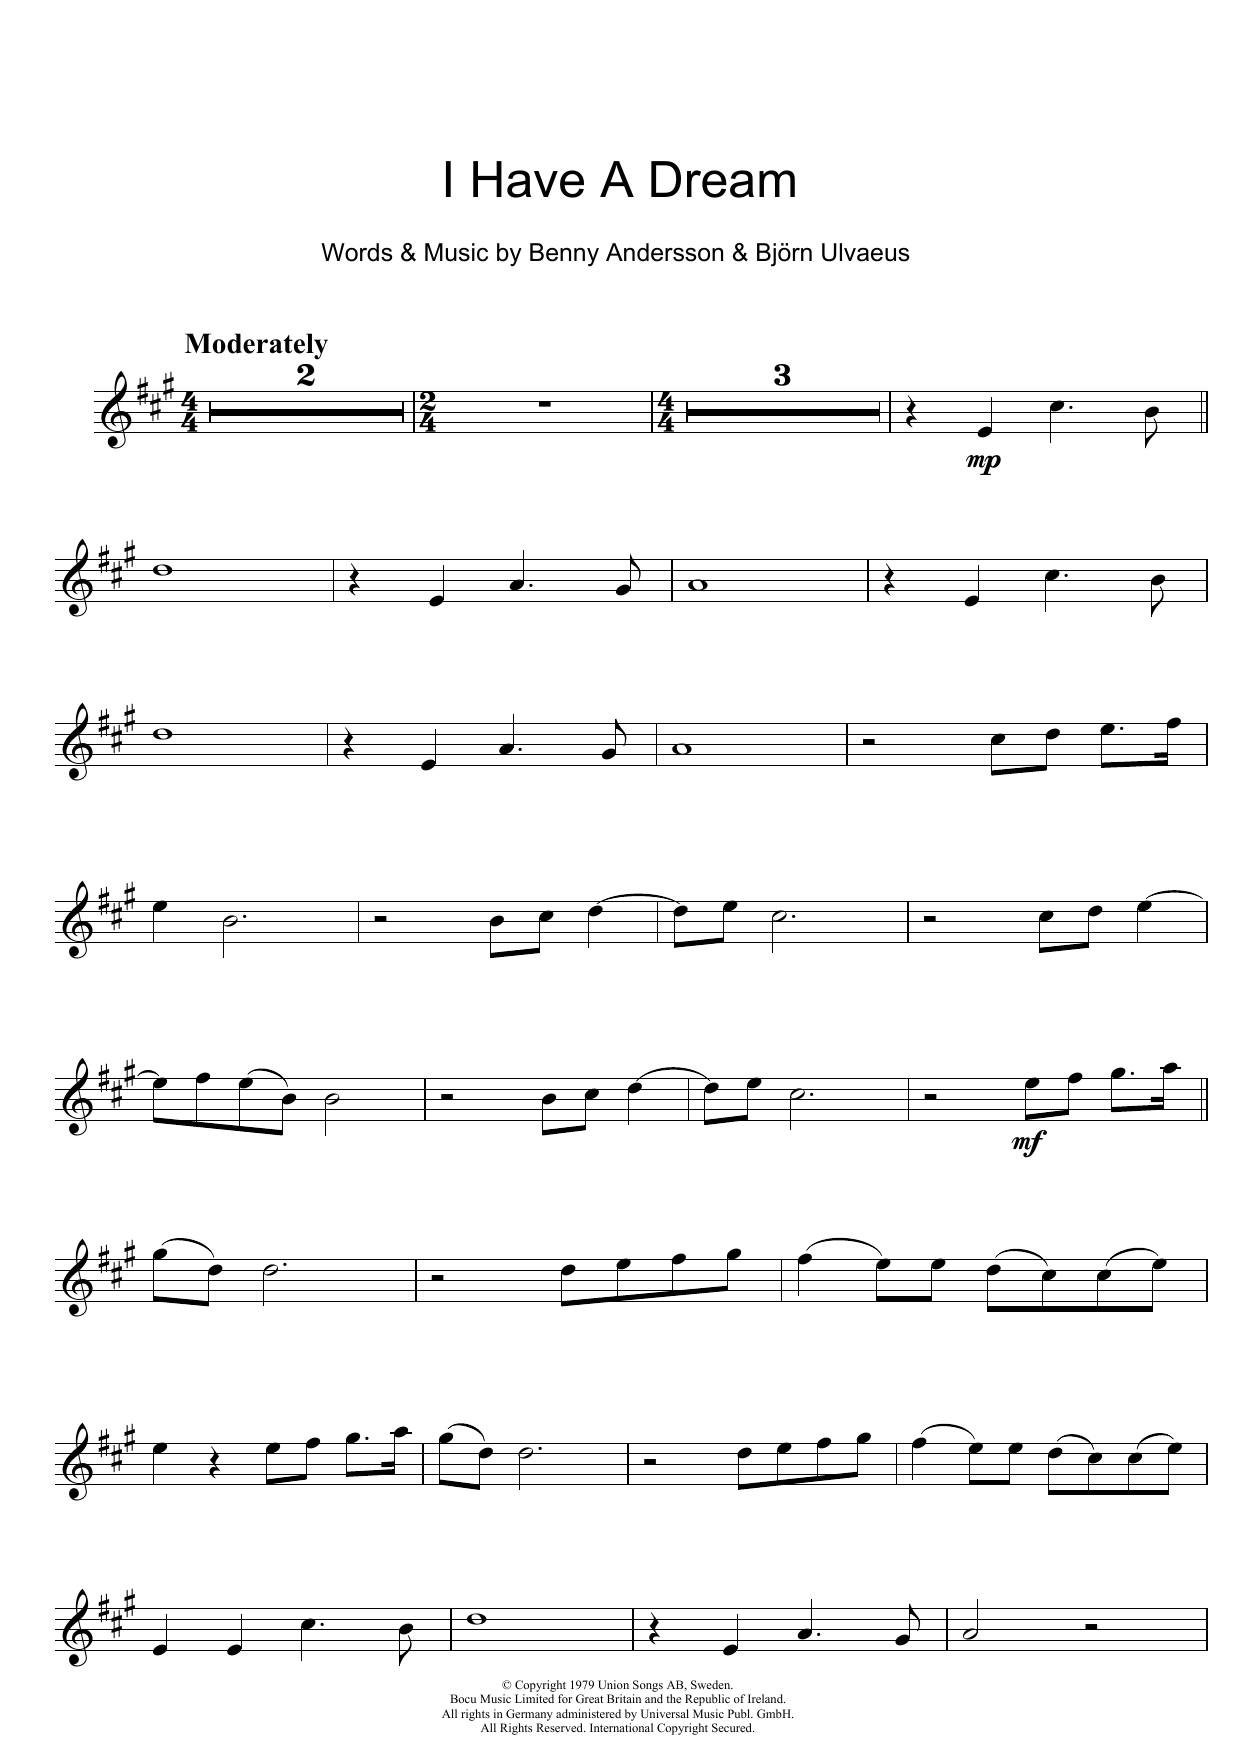 Download ABBA I Have A Dream Sheet Music